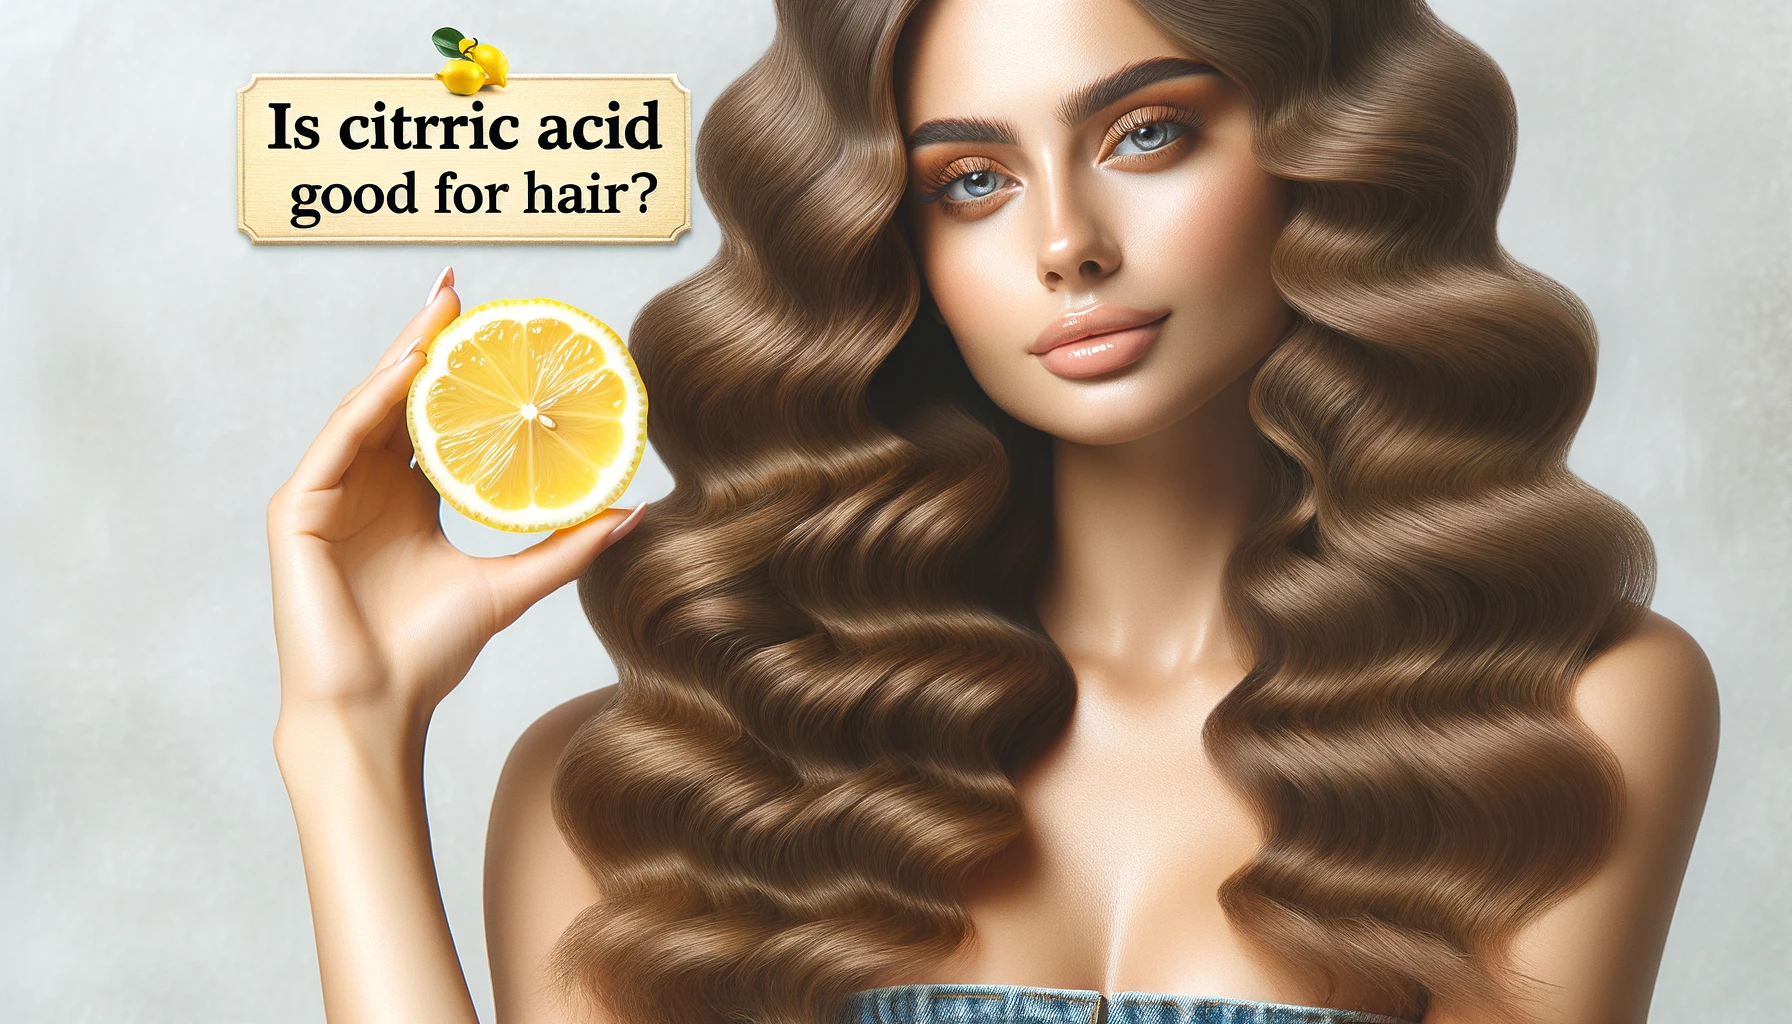 Is Citric Acid Good for Hair